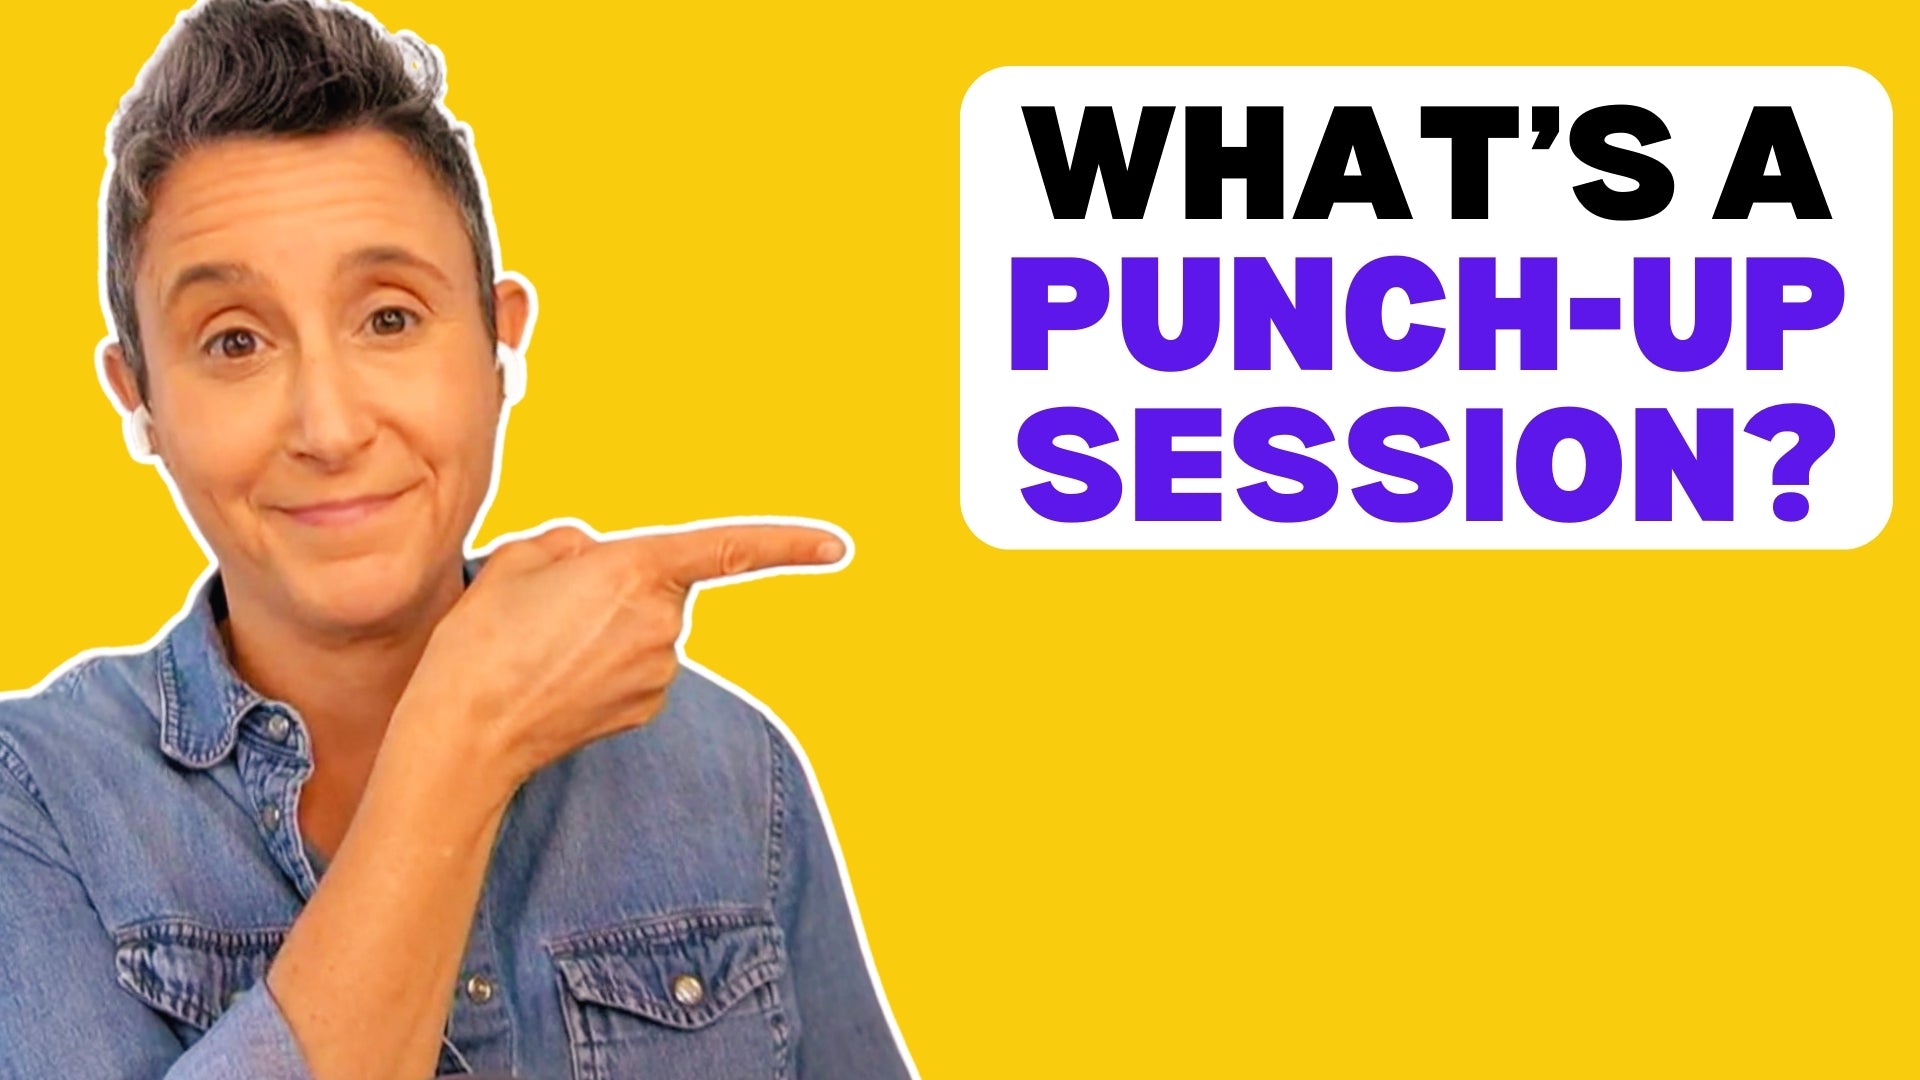 Load video: What are Live Punch-Up Sessions?